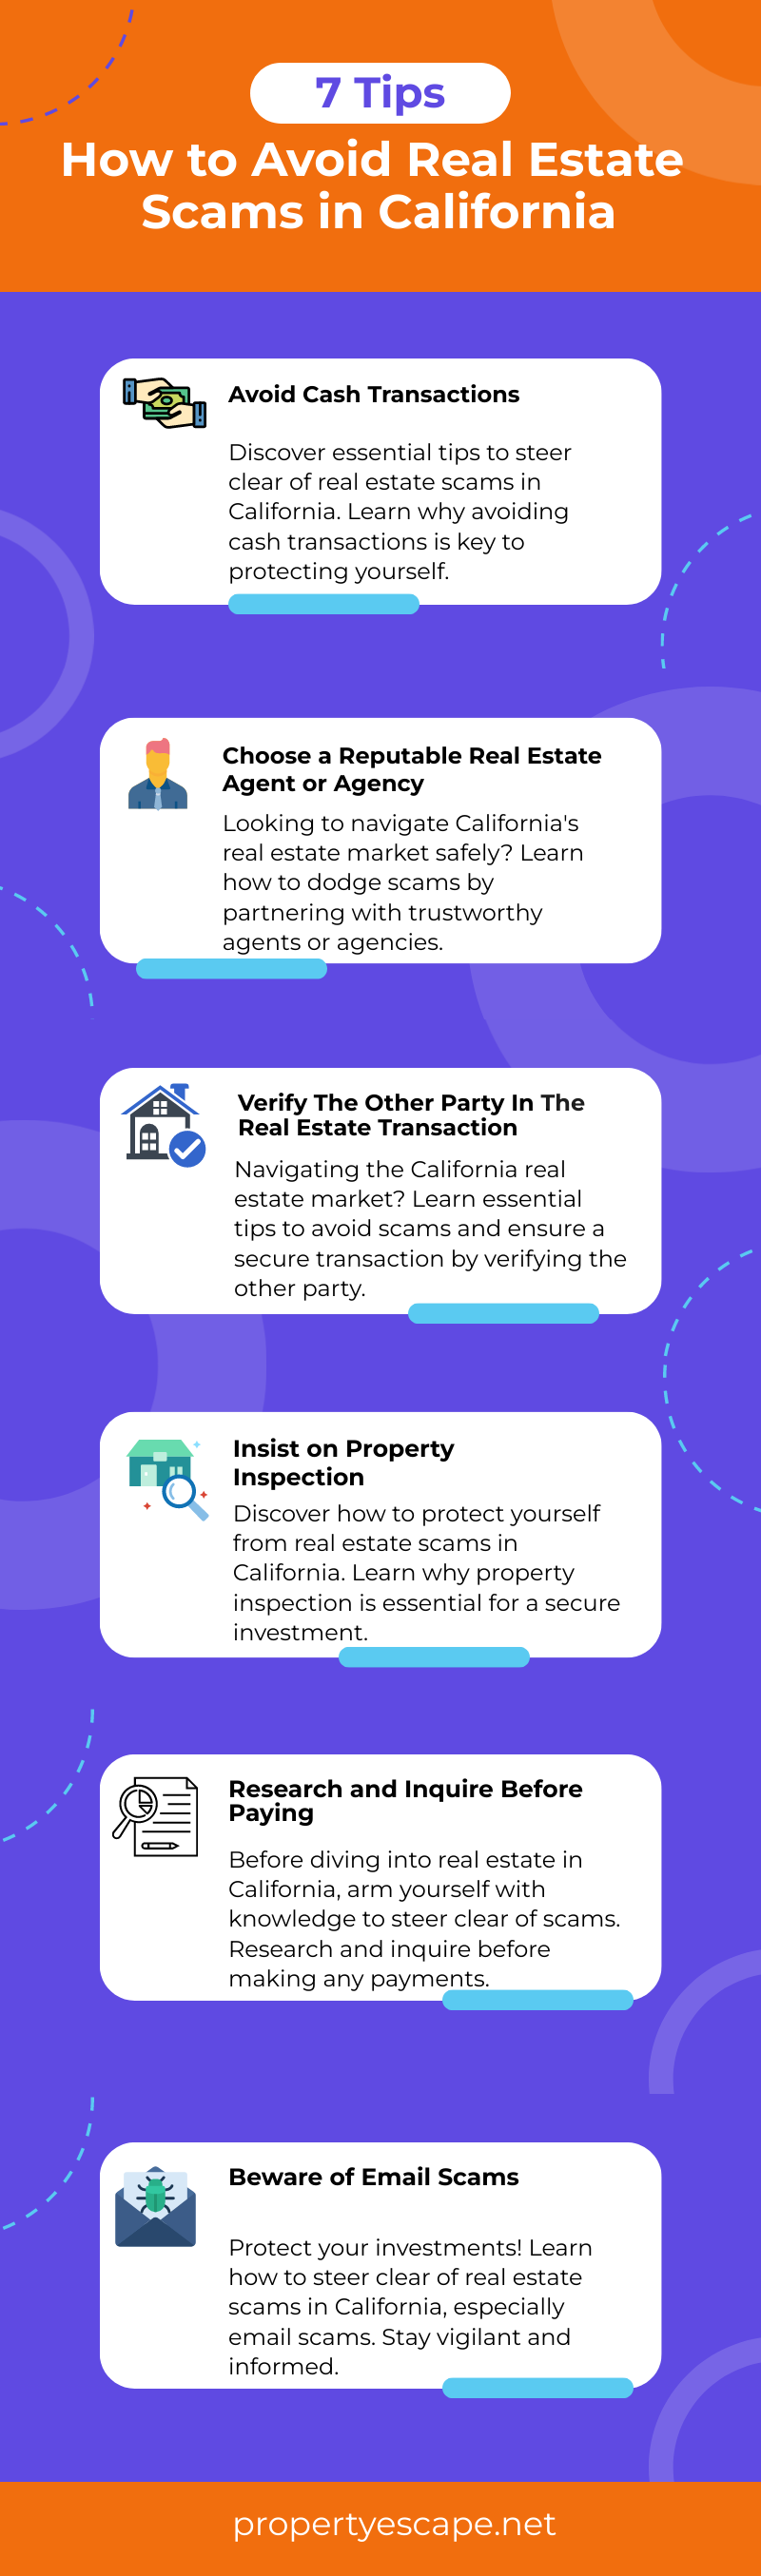 this infographic presents 6 tips to avoid real estate scams